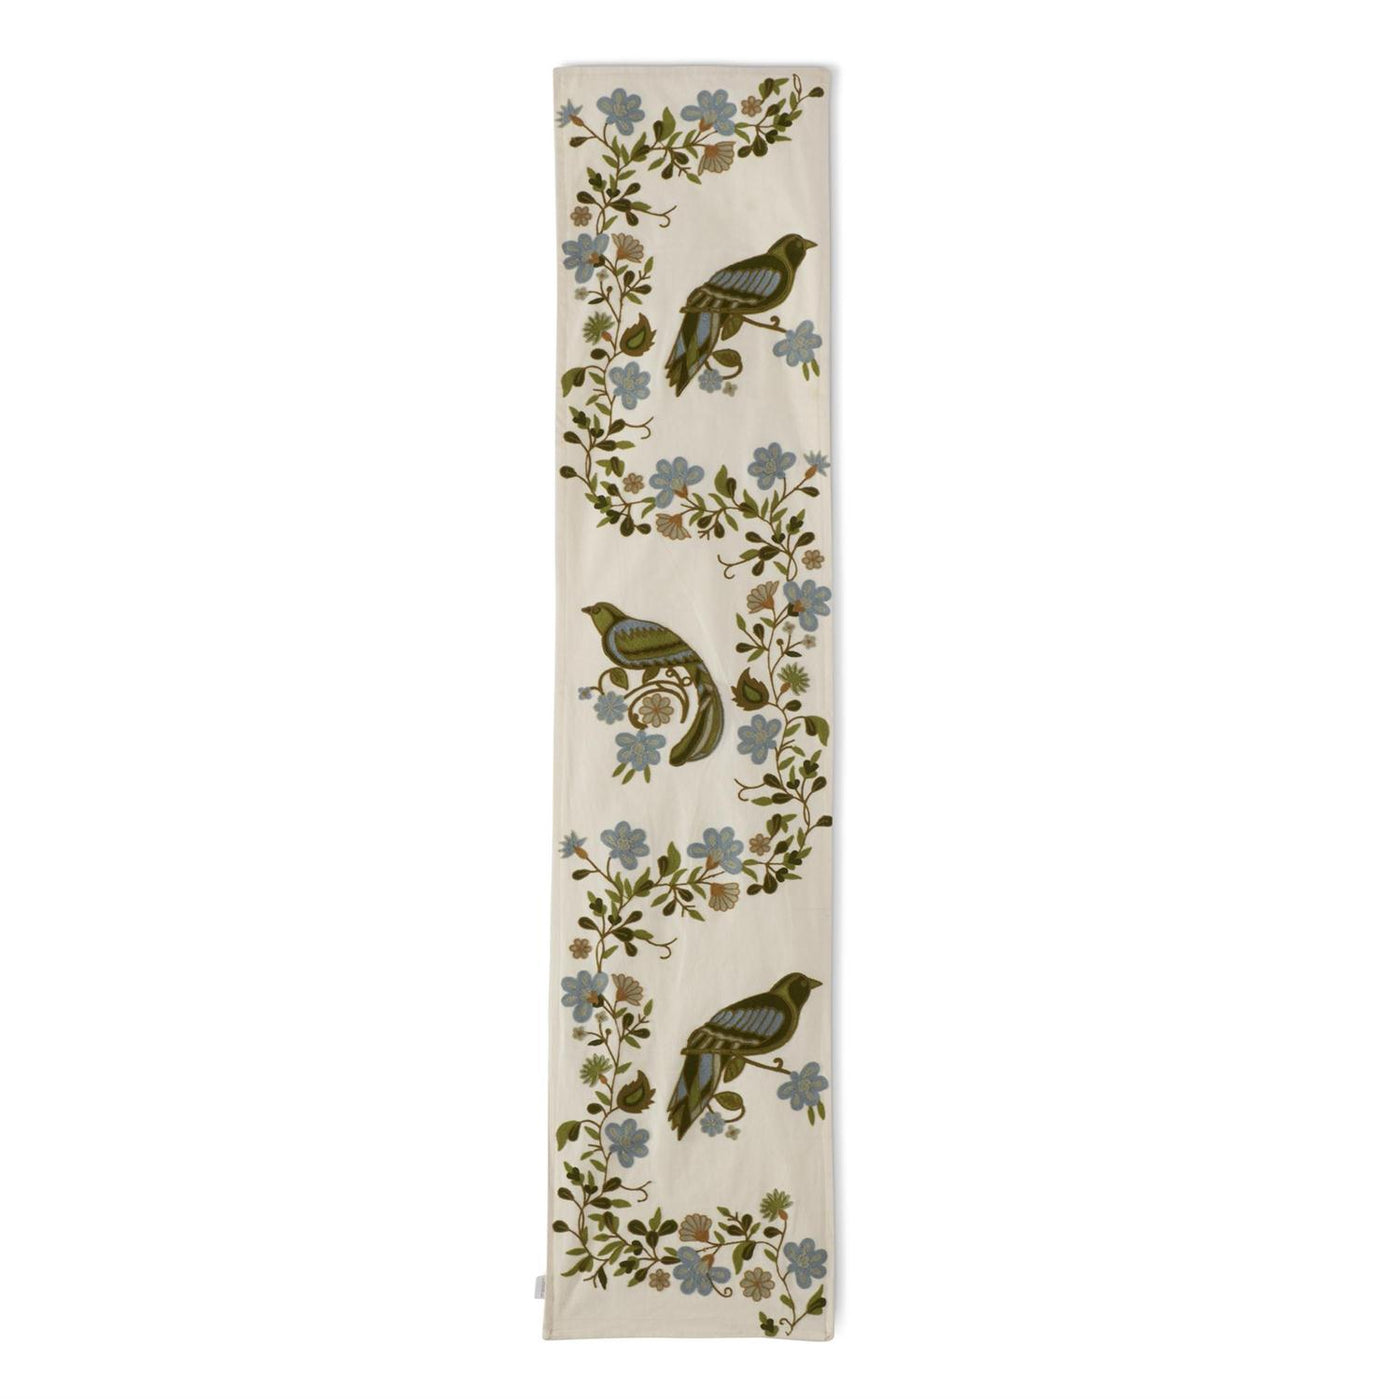 72" Blue Green Floral & Bird Embroidered Table Runner-Home/Giftware-Kevin's Fine Outdoor Gear & Apparel